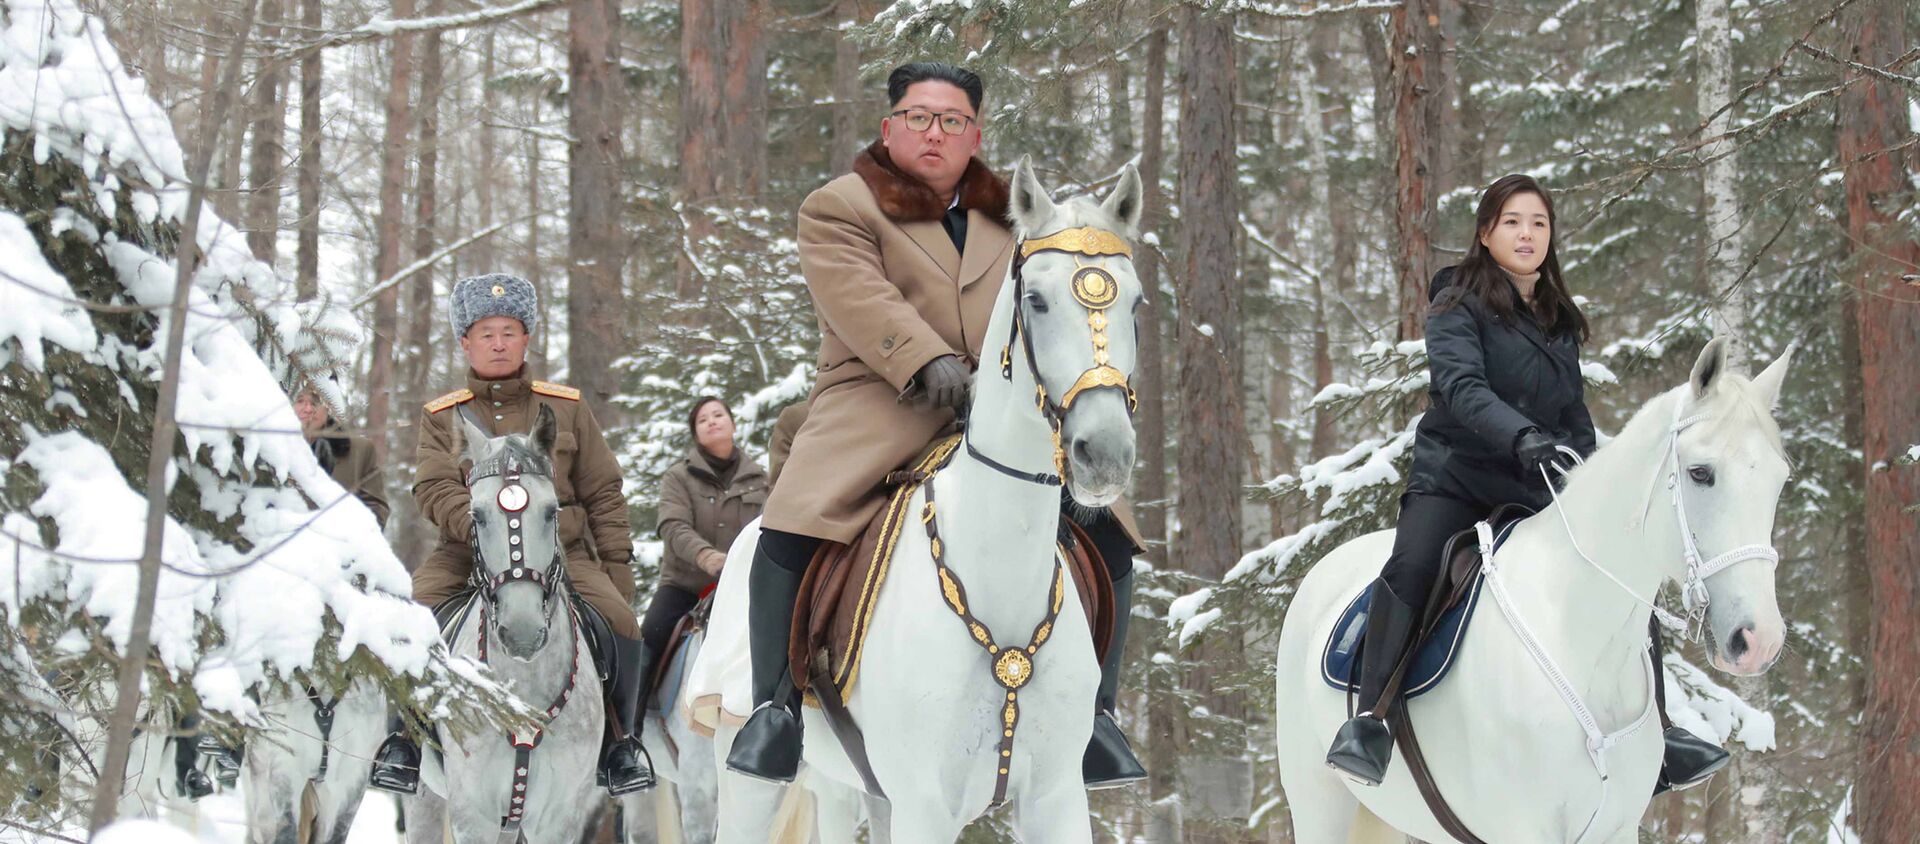 North Korean leader Kim Jong Un rides a horse as he visits battle sites in areas of Mt Paektu, Ryanggang, North Korea, in this undated picture released by North Korea's Central News Agency (KCNA) on December 4, 2019 - Sputnik International, 1920, 04.12.2019